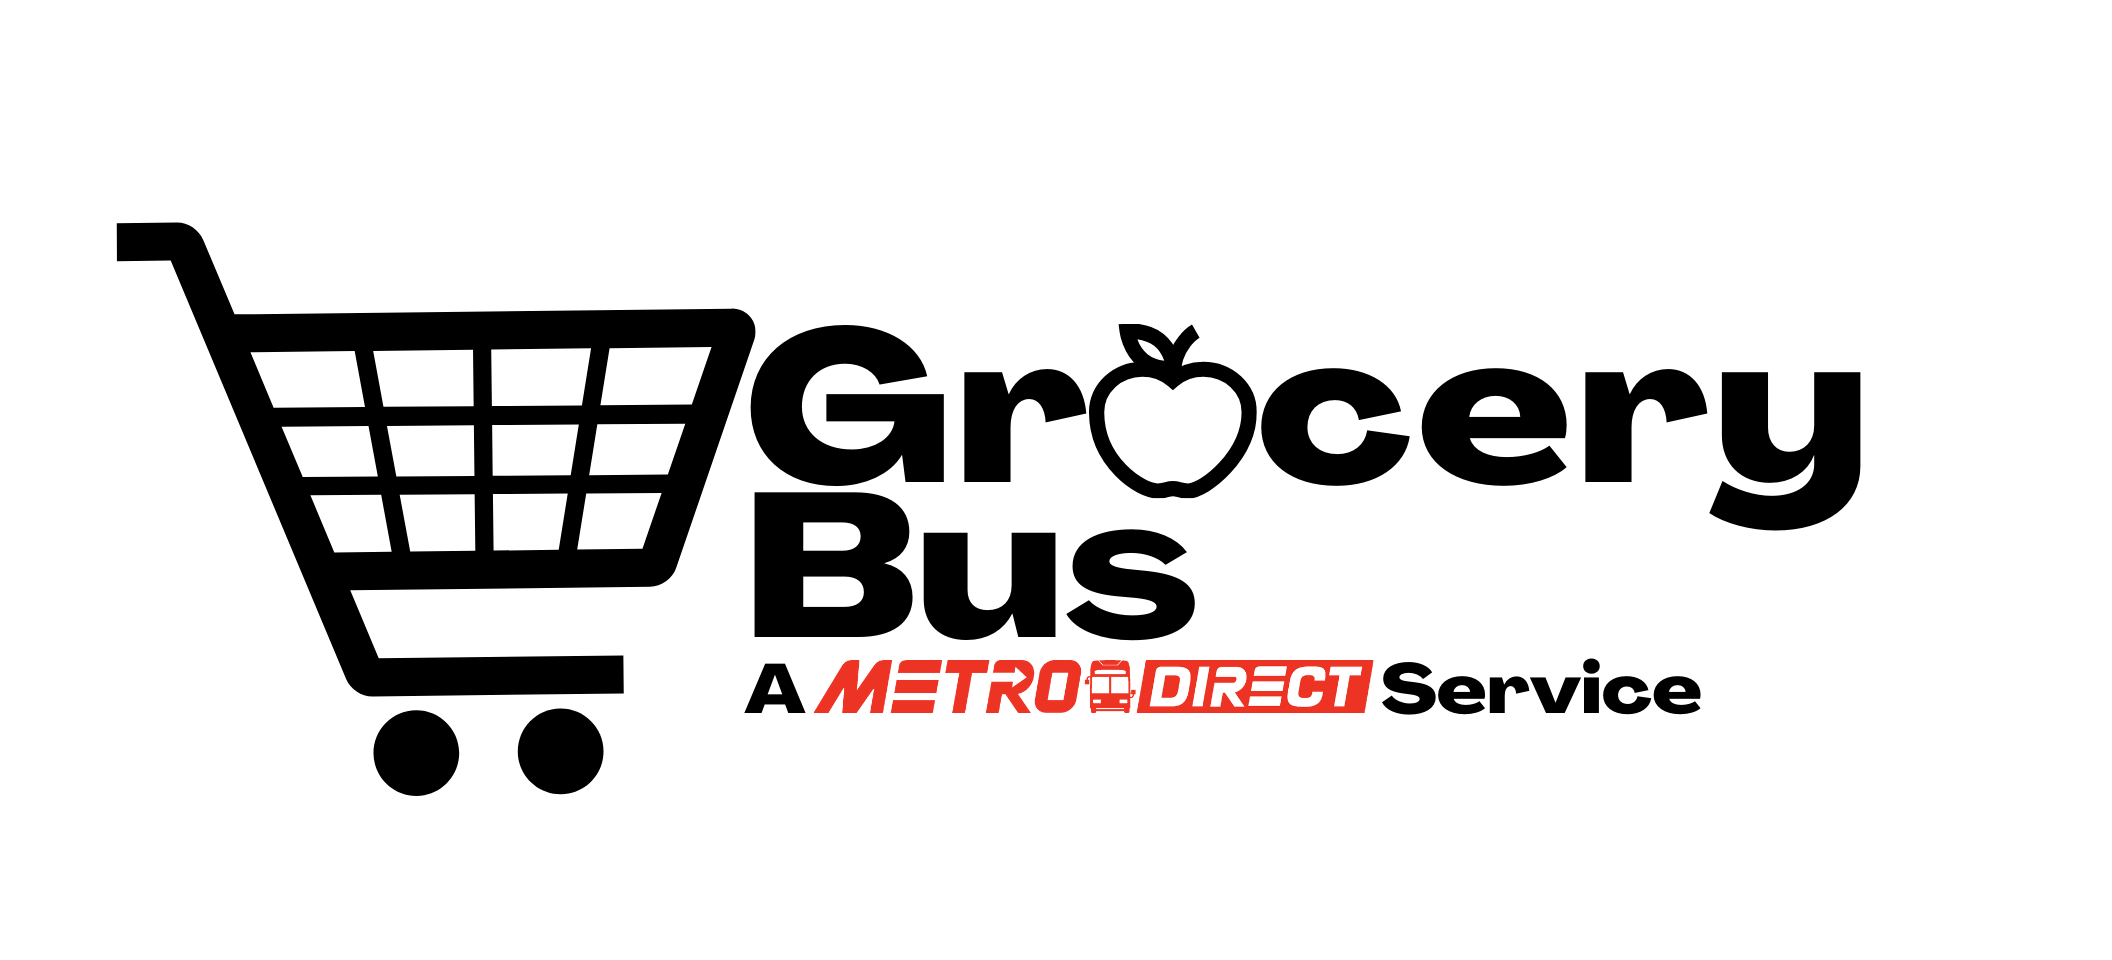 Grocery bus logo cart with text and apple